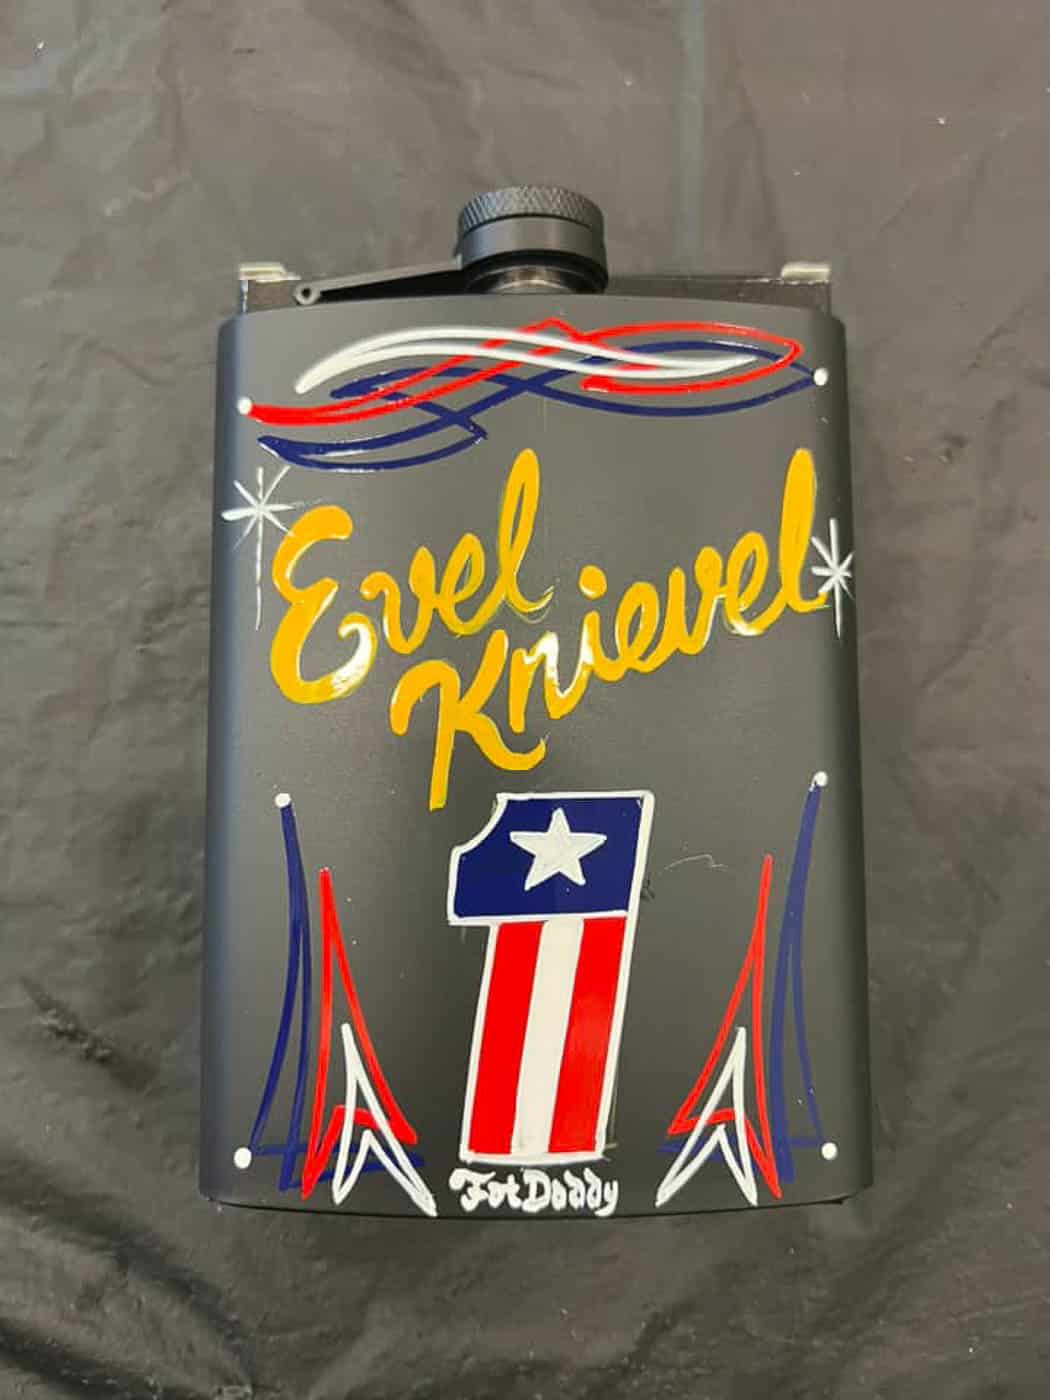 Evel Knievel and Harley 1 logo on can